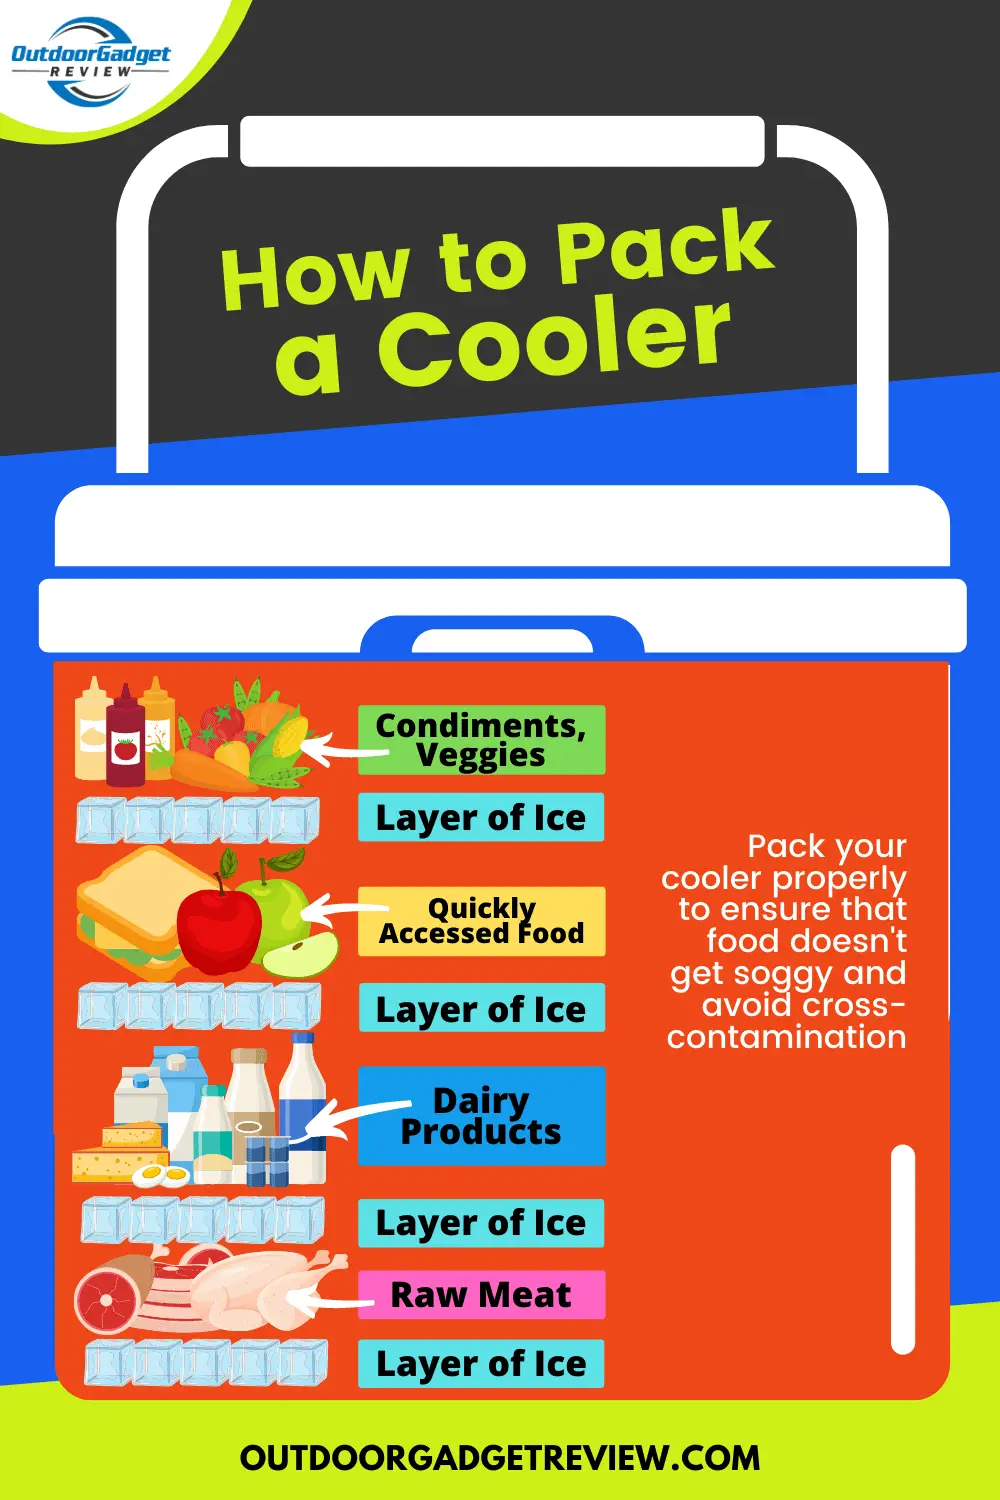 How to Pack a Cooler